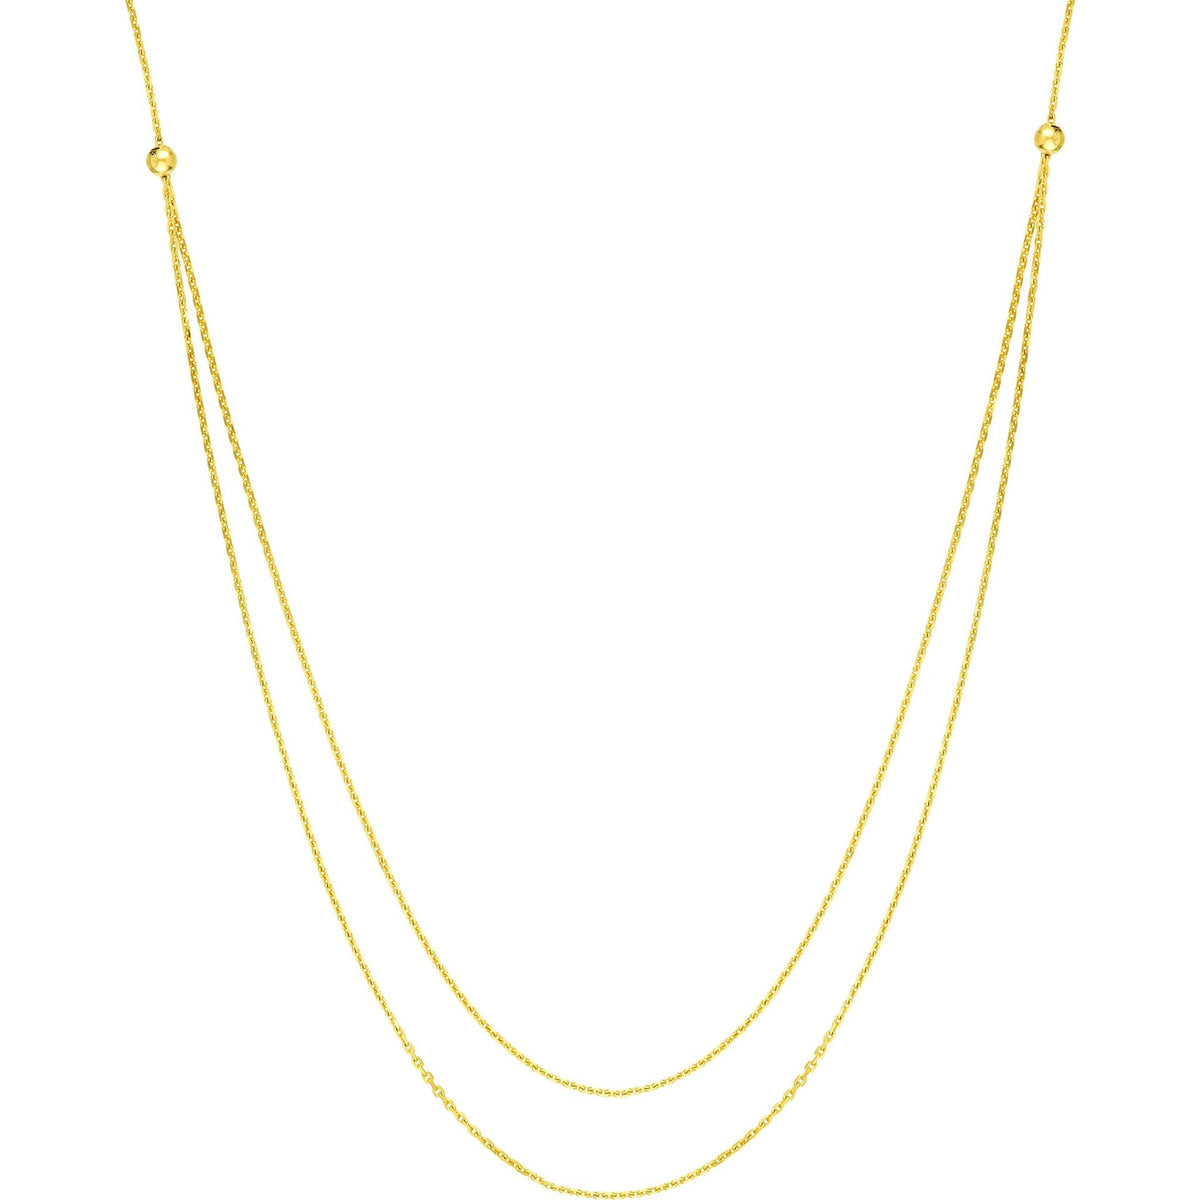 Beautiful 14k yellow gold diamond-cut cable chain necklace featured at Robinson's Jewelers